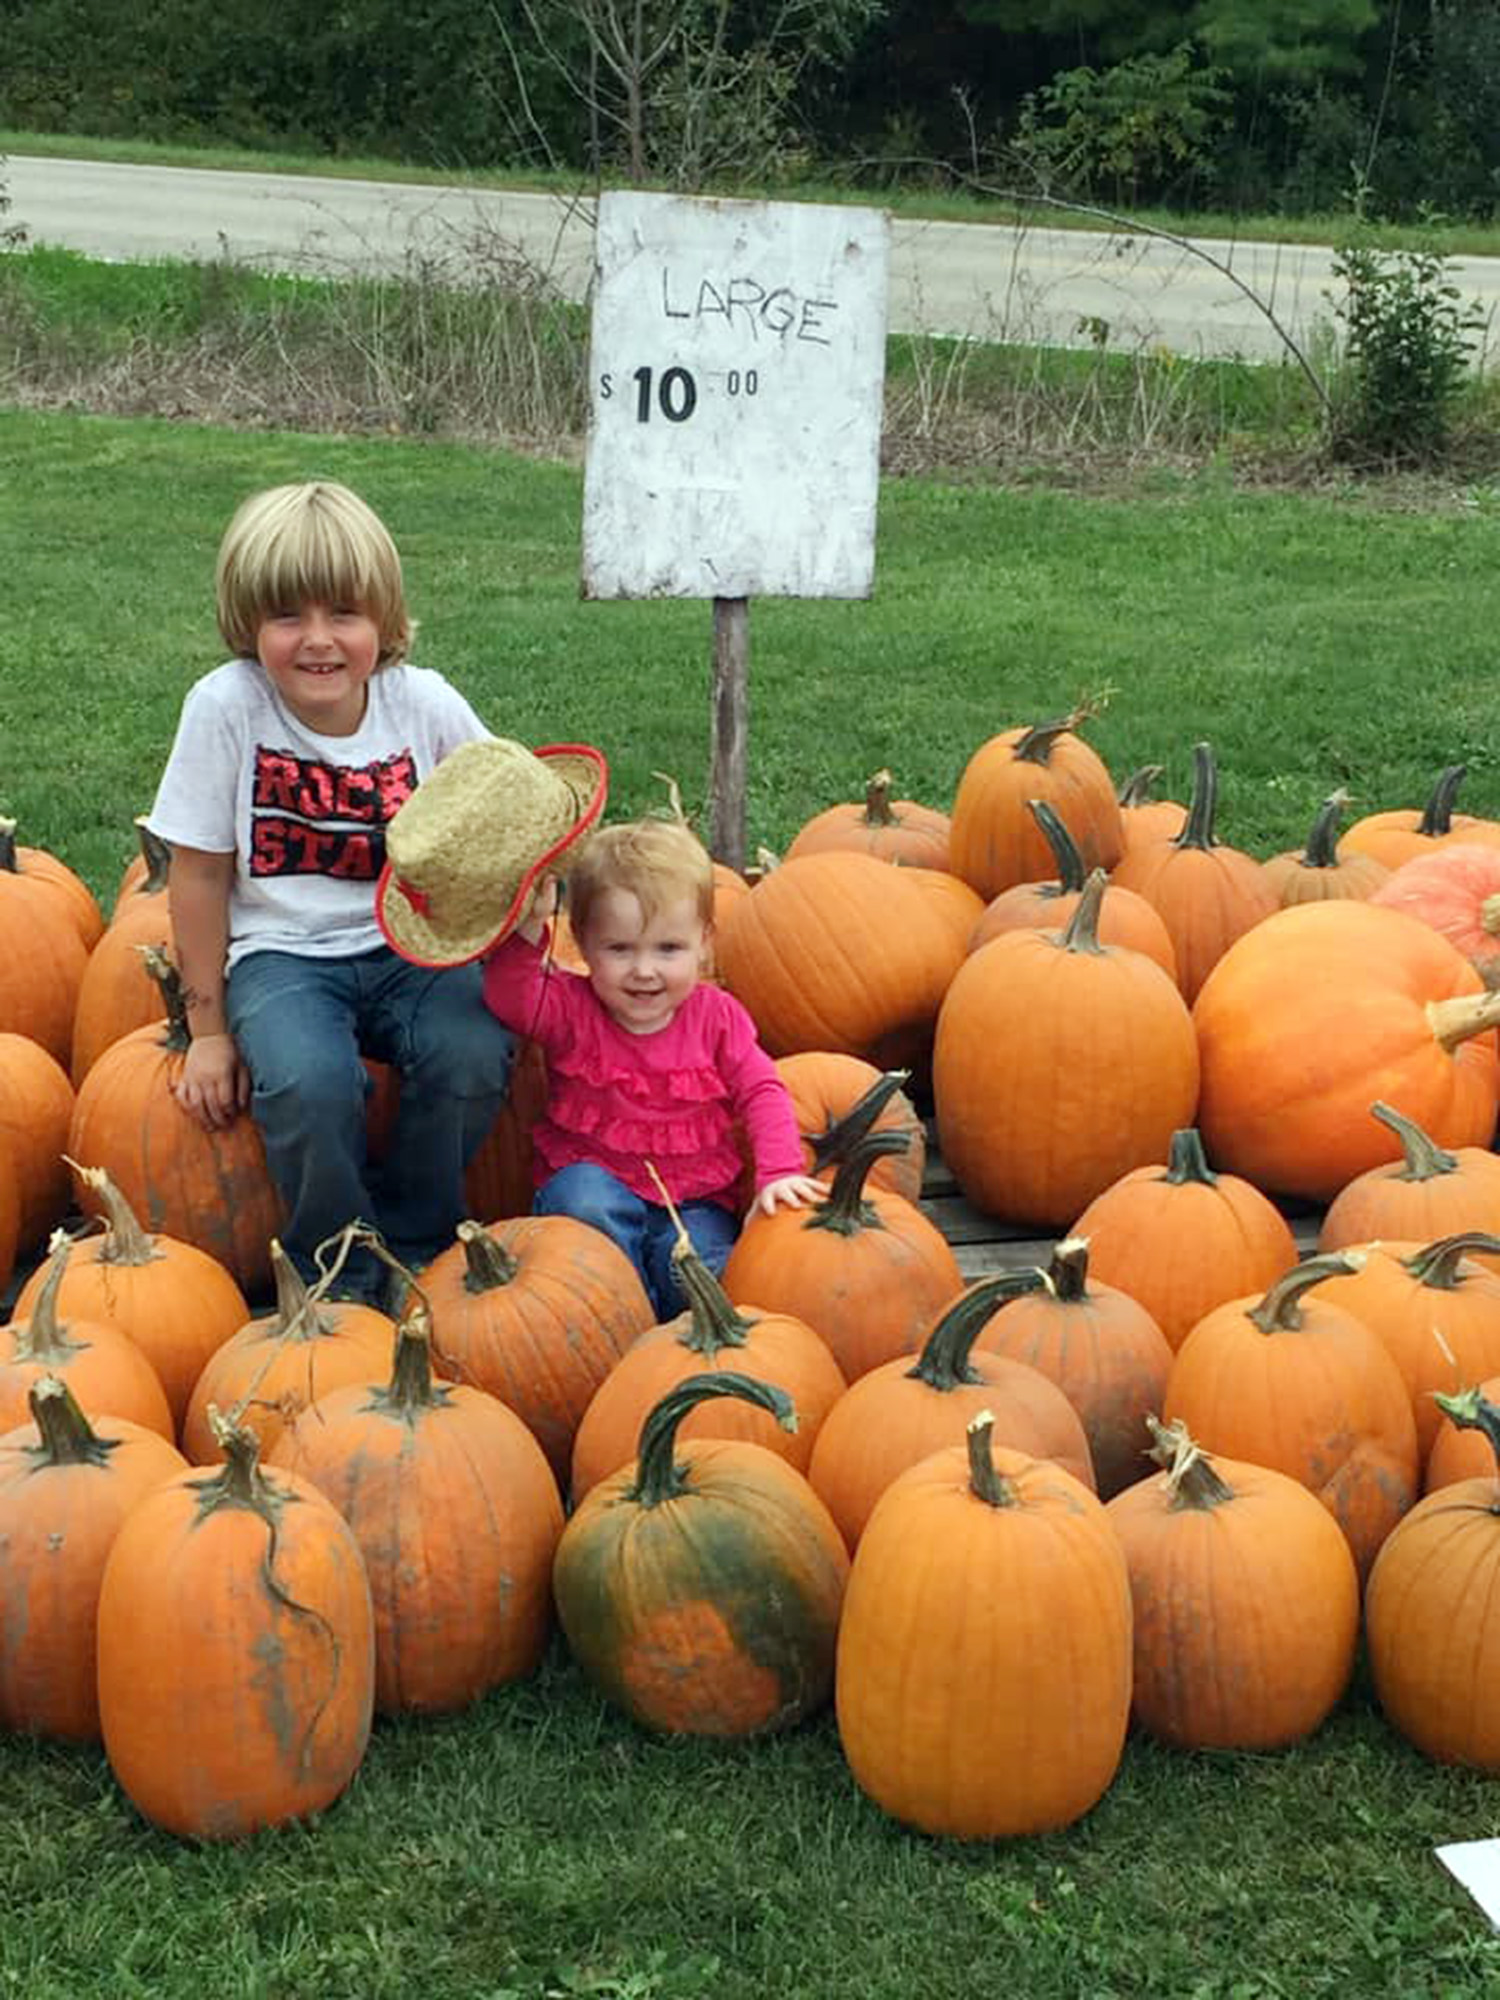 PHOTO: 6-year-old Ian Christensen who suffers from type 1 diabetes poses for a photo with his younger sister while selling pumpkins outside his home in Sand Lake, Mich., in hopes of raising money to buy an alert dog that can help him with his disease.